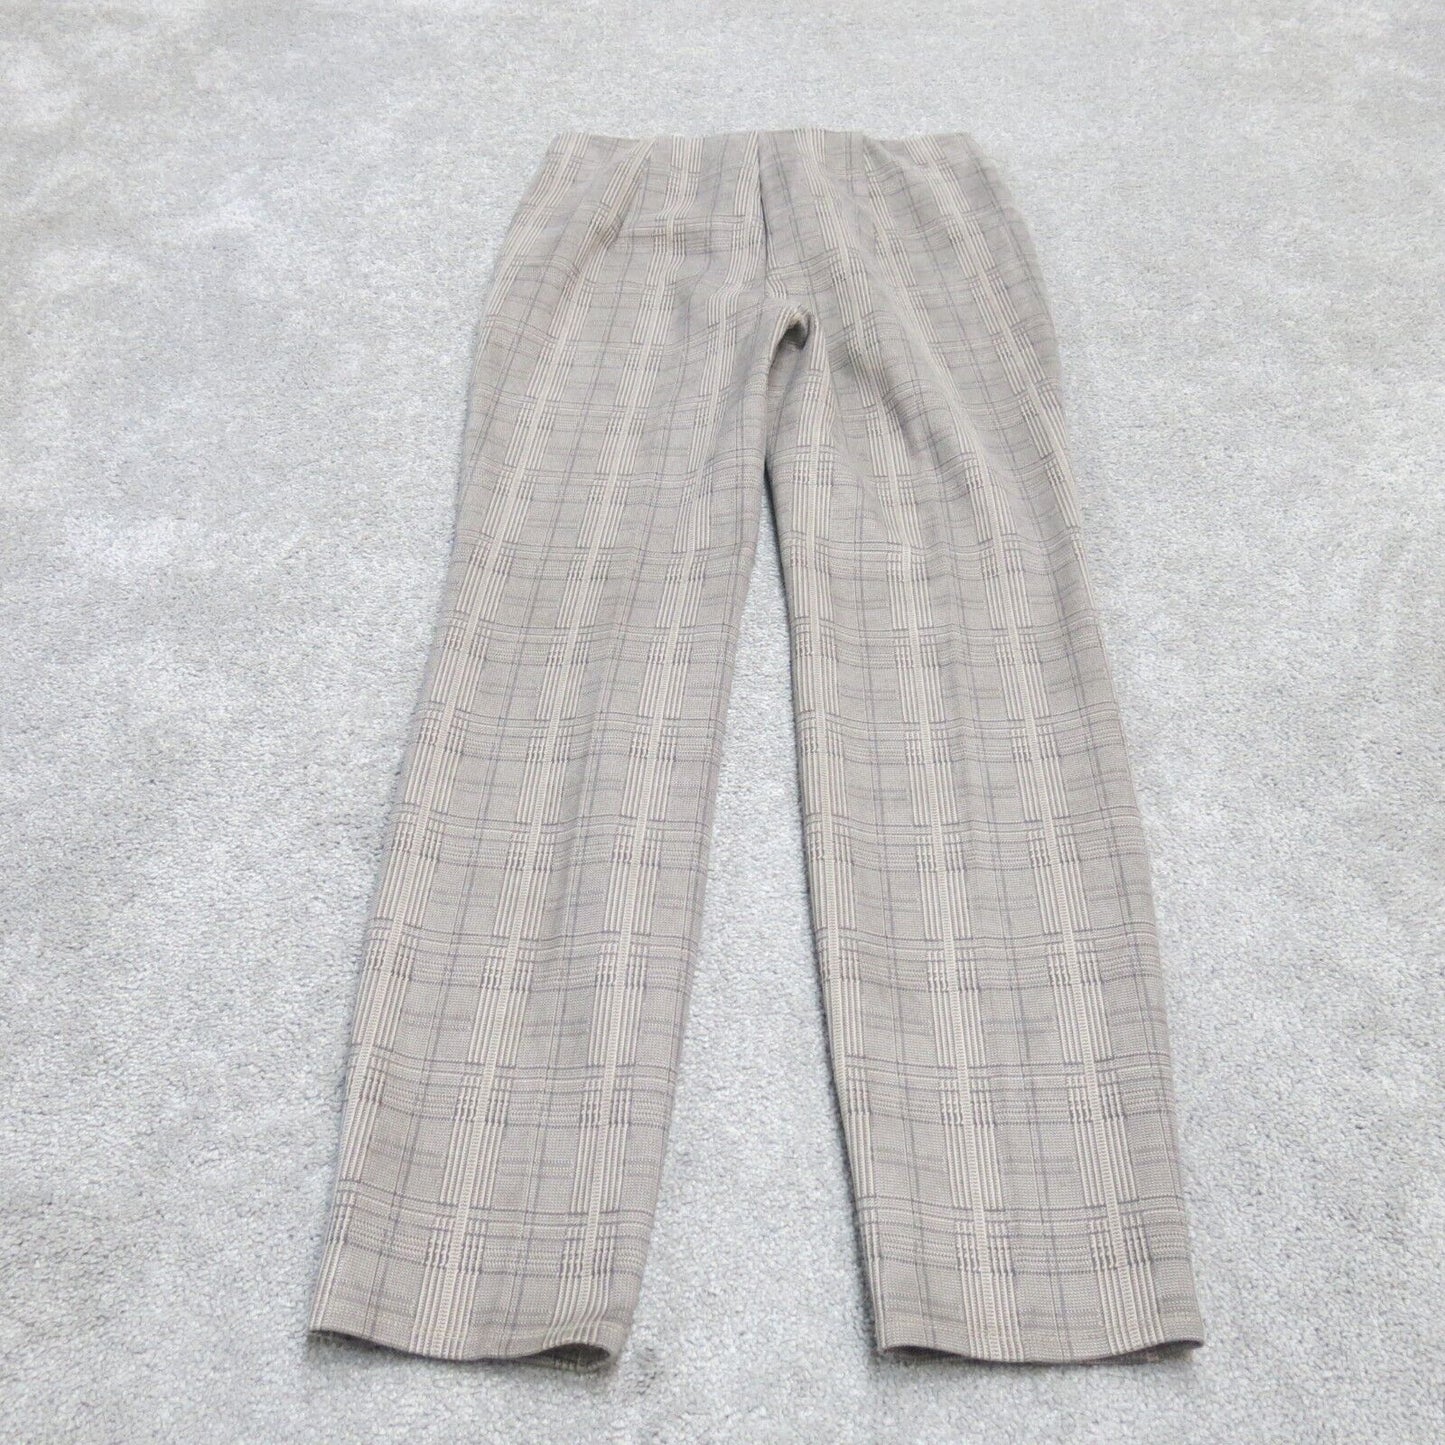 Tahari Womens Ankle Skinny Pant Low Rise Plaid Houndstooth Gray Beige Size XS